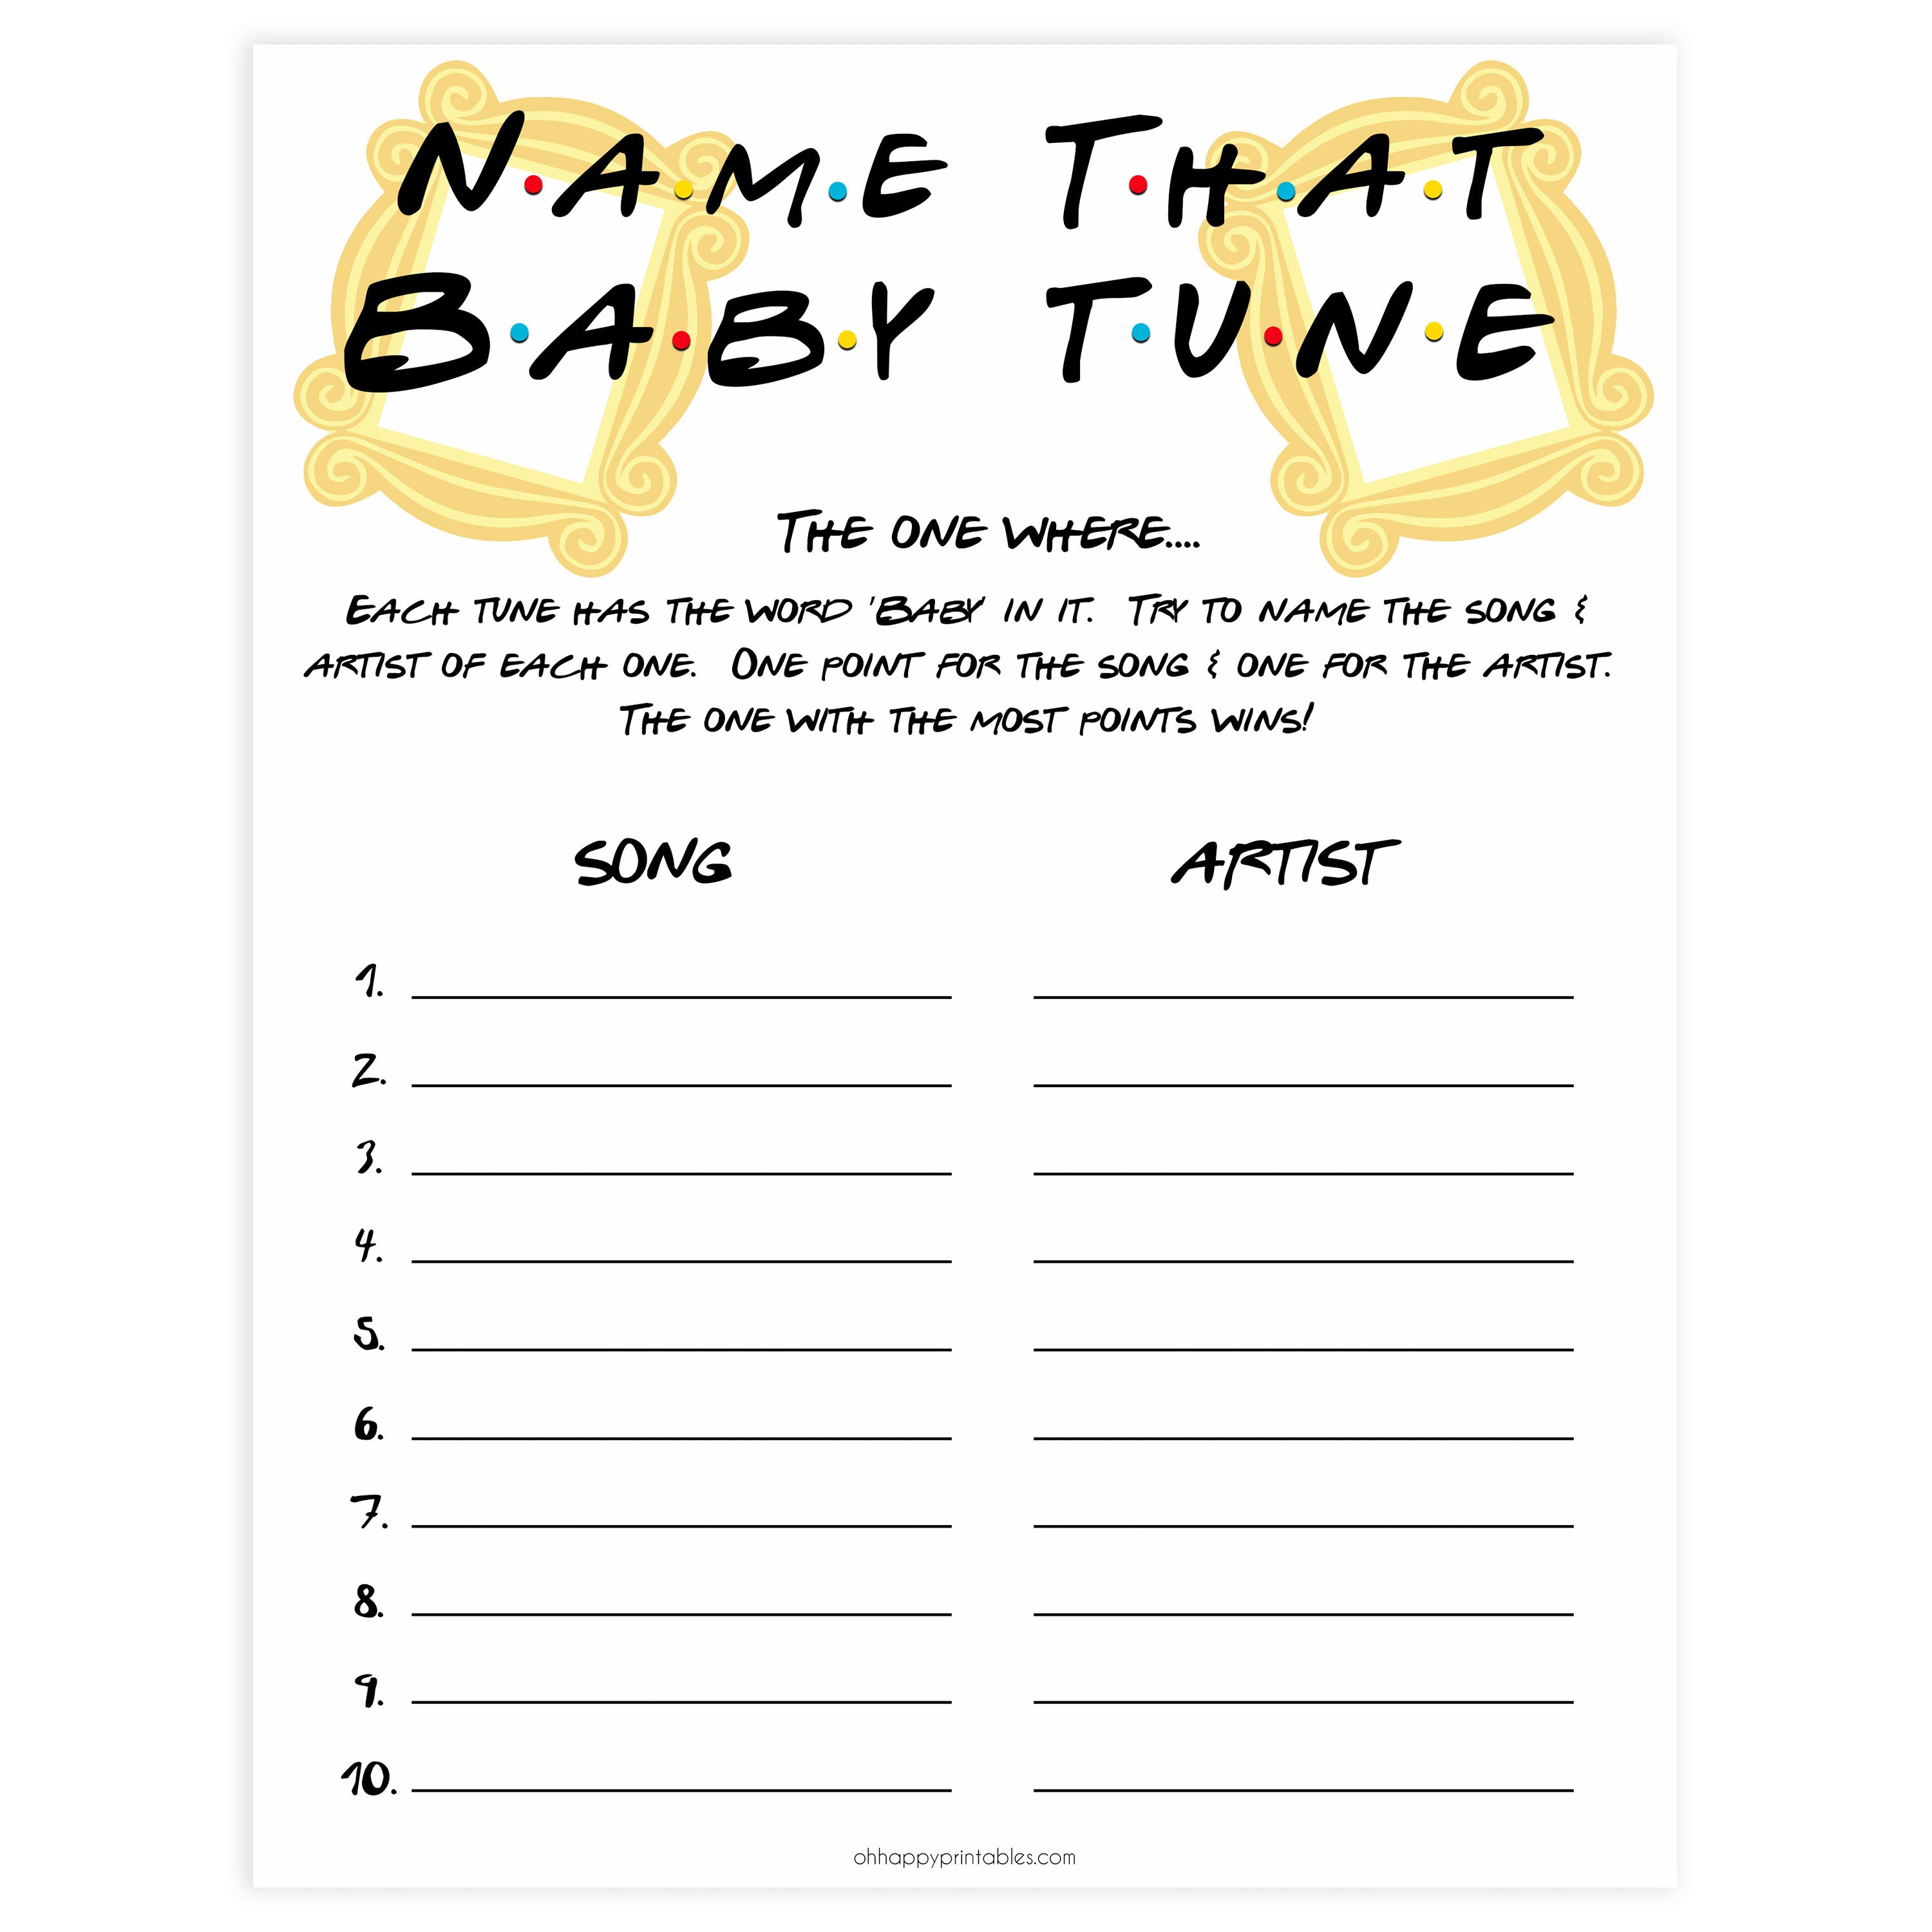 name that baby tune, Printable baby shower games, friends fun baby games, baby shower games, fun baby shower ideas, top baby shower ideas, friends baby shower, friends baby shower ideas